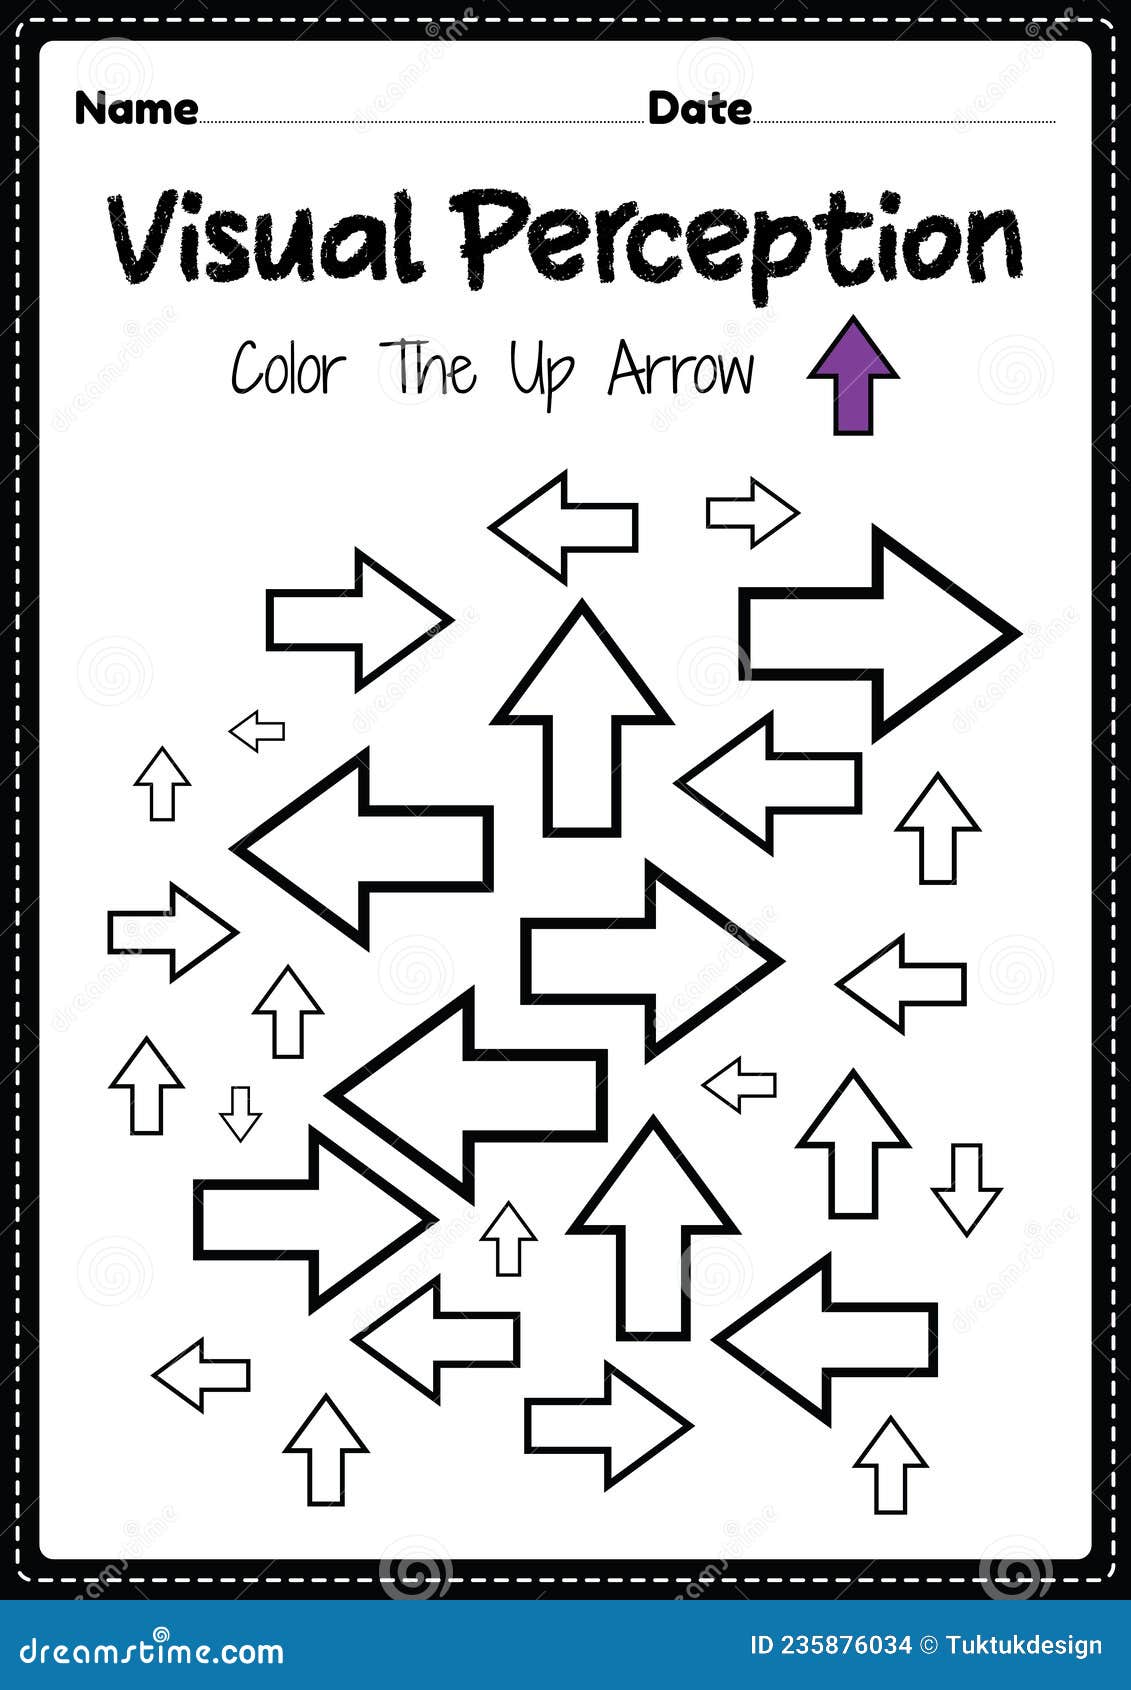 visual-perception-worksheet-skills-activity-of-occupation-therapy-arrow-recognition-for